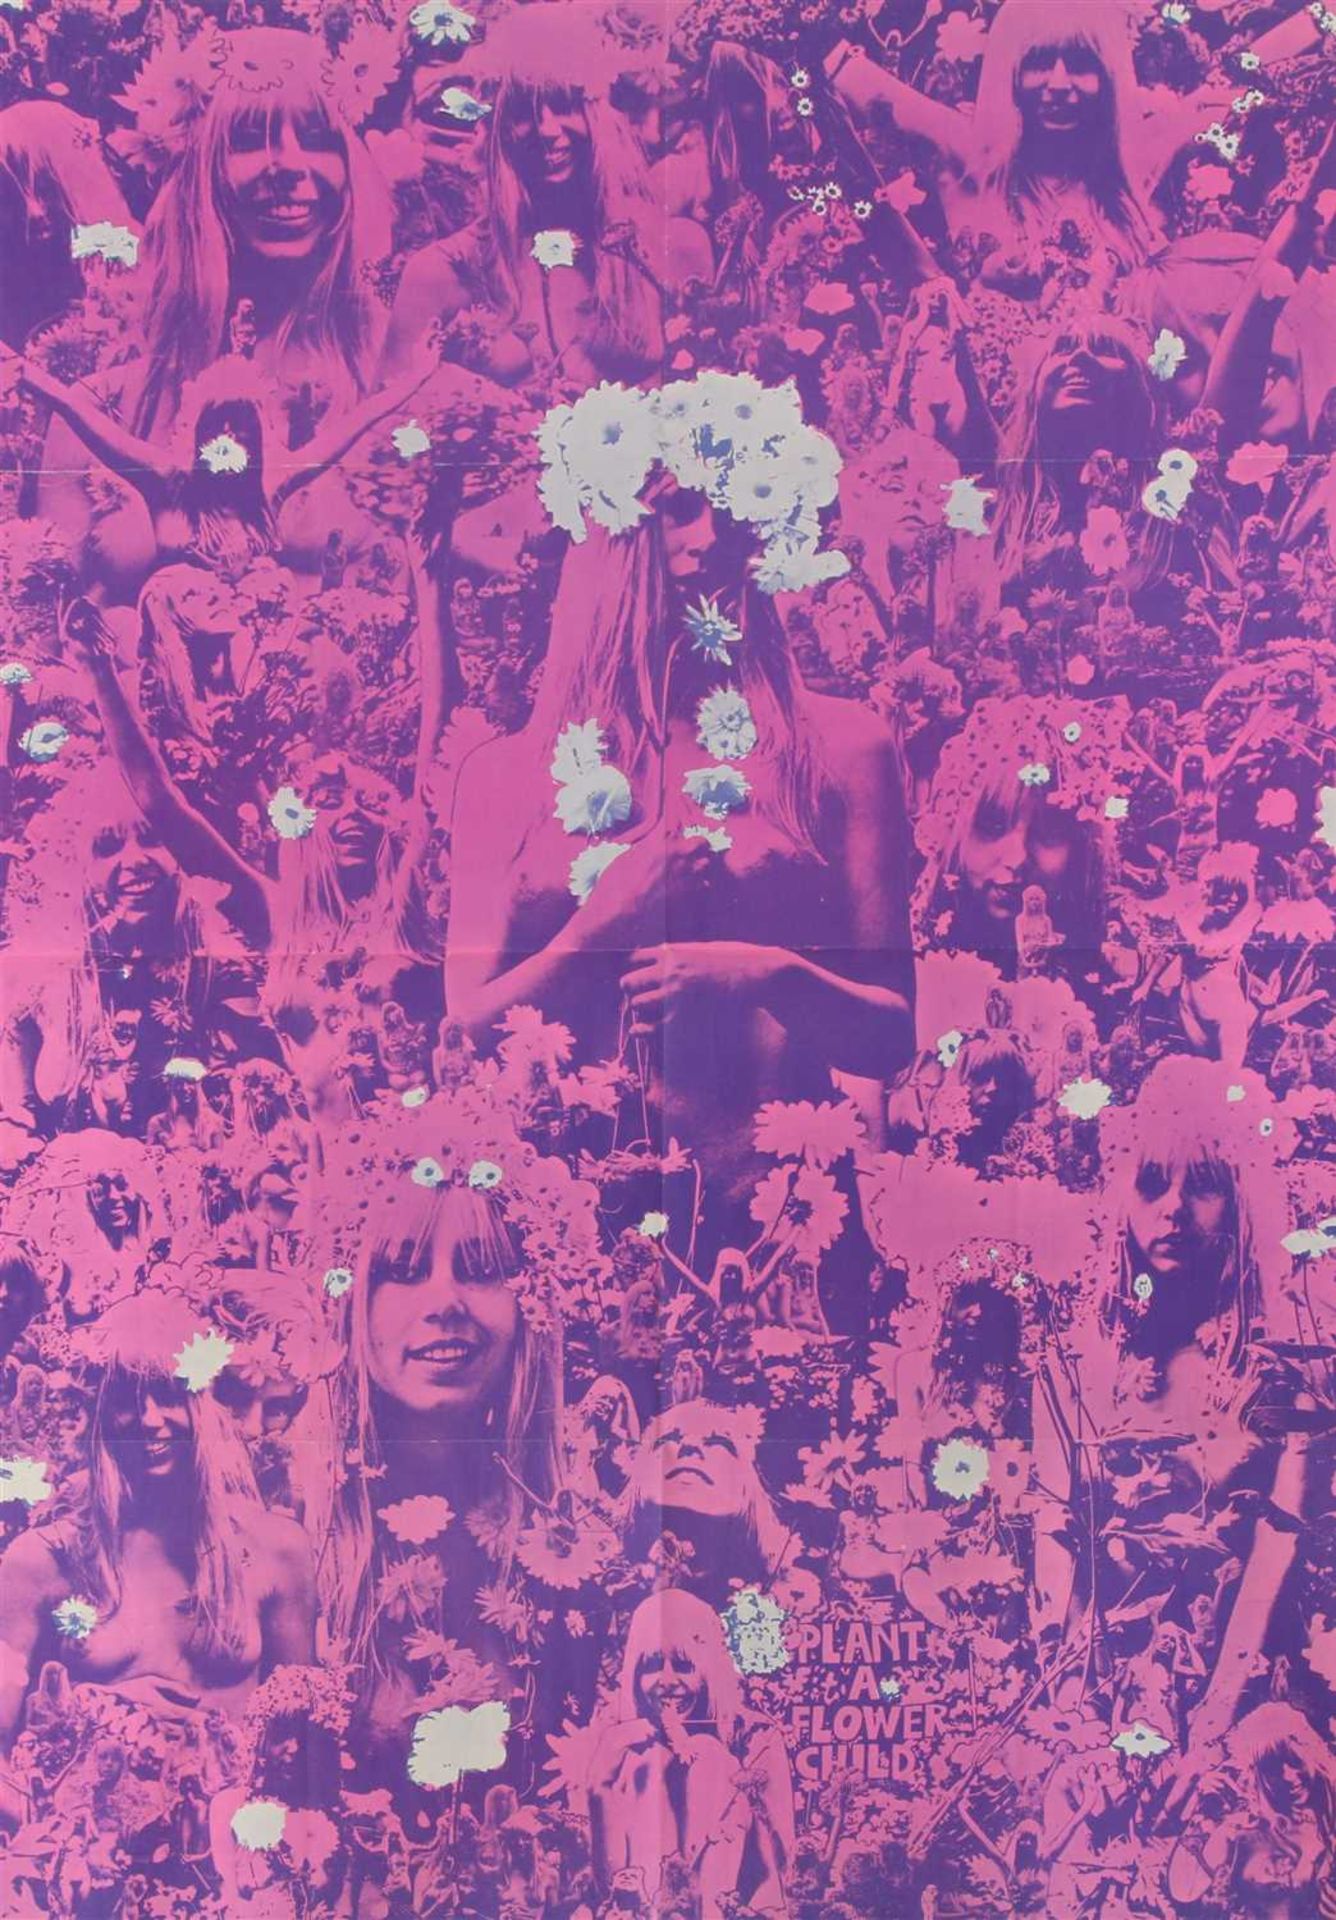 A RARE PINK 'PLANT A FLOWER CHILD' 1967 POSTER,